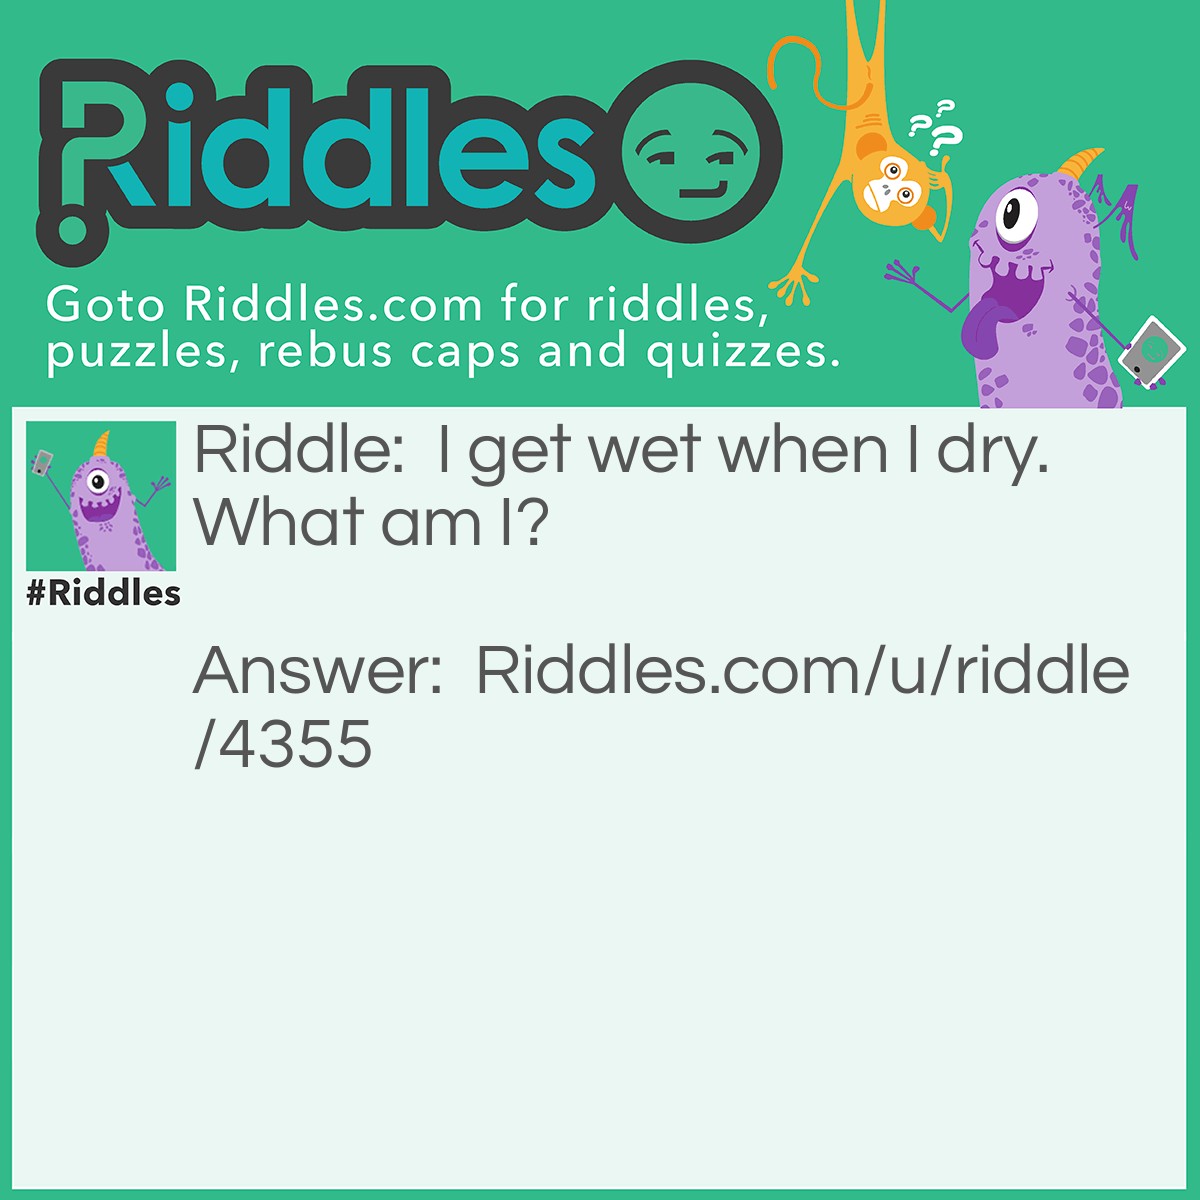 Riddle: I get wet when I dry. What am I? Answer: A towel.